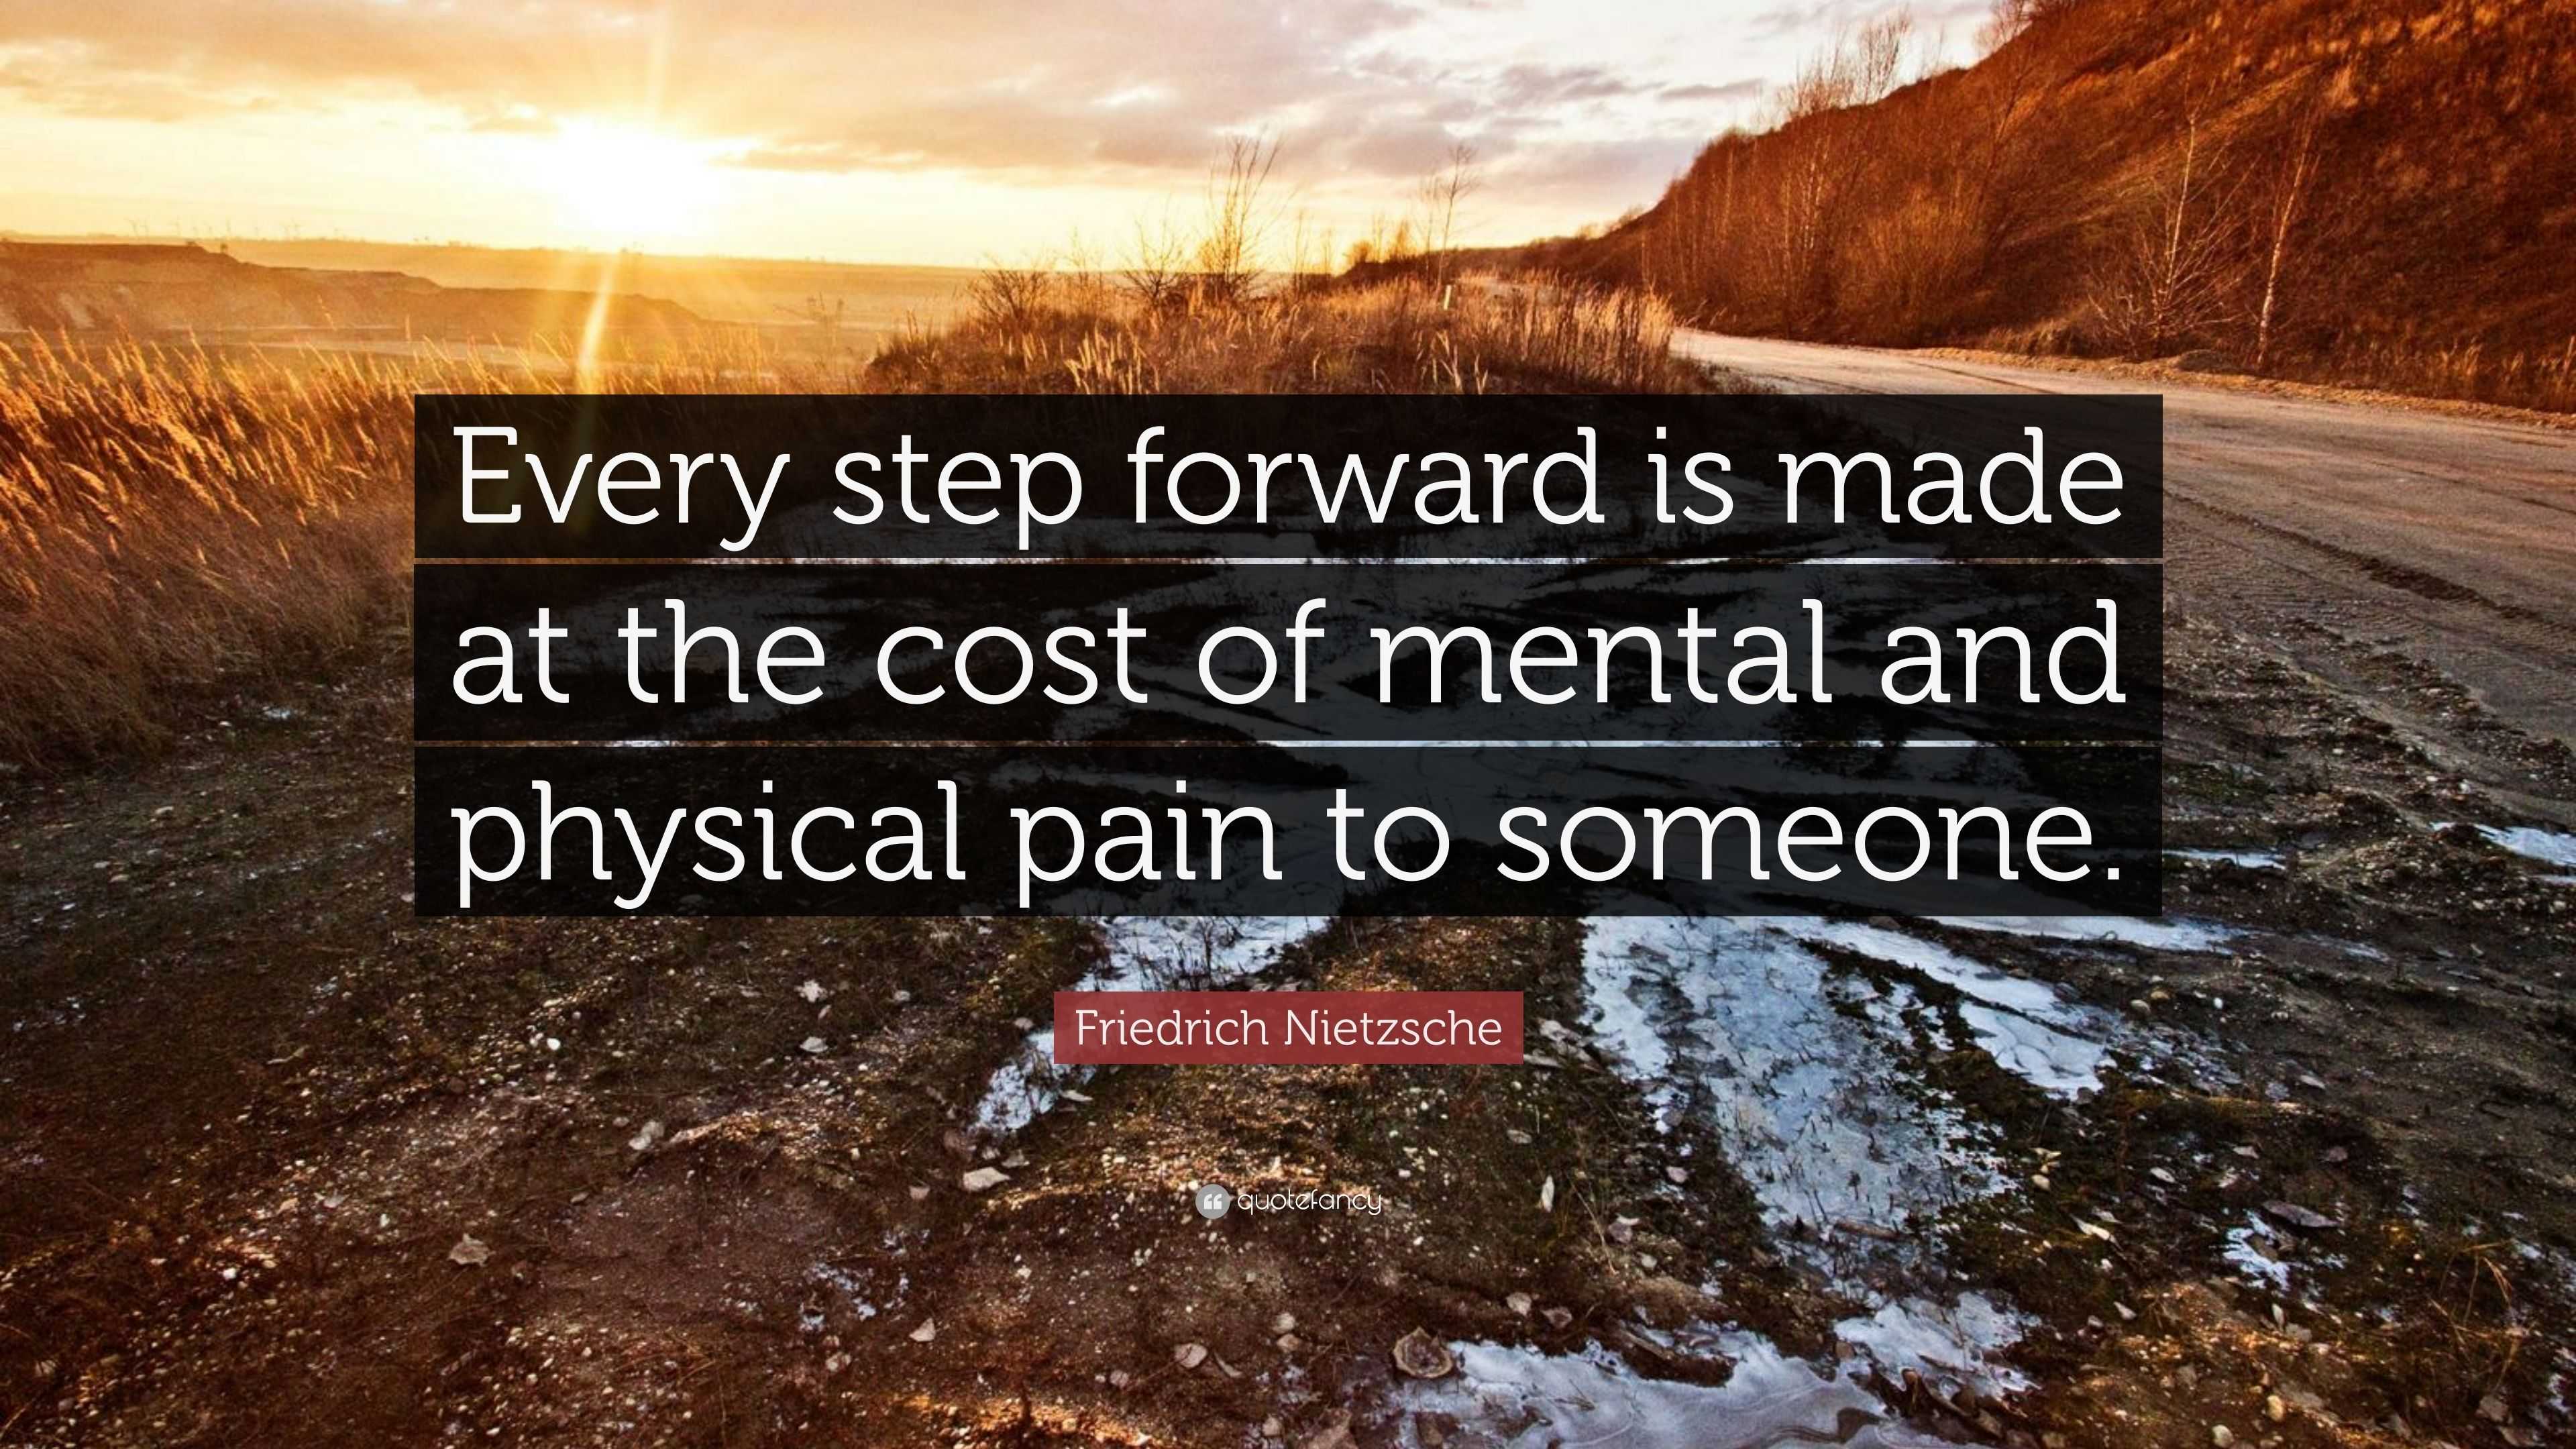 Friedrich Nietzsche Quote: “Every step forward is made at the cost of ...